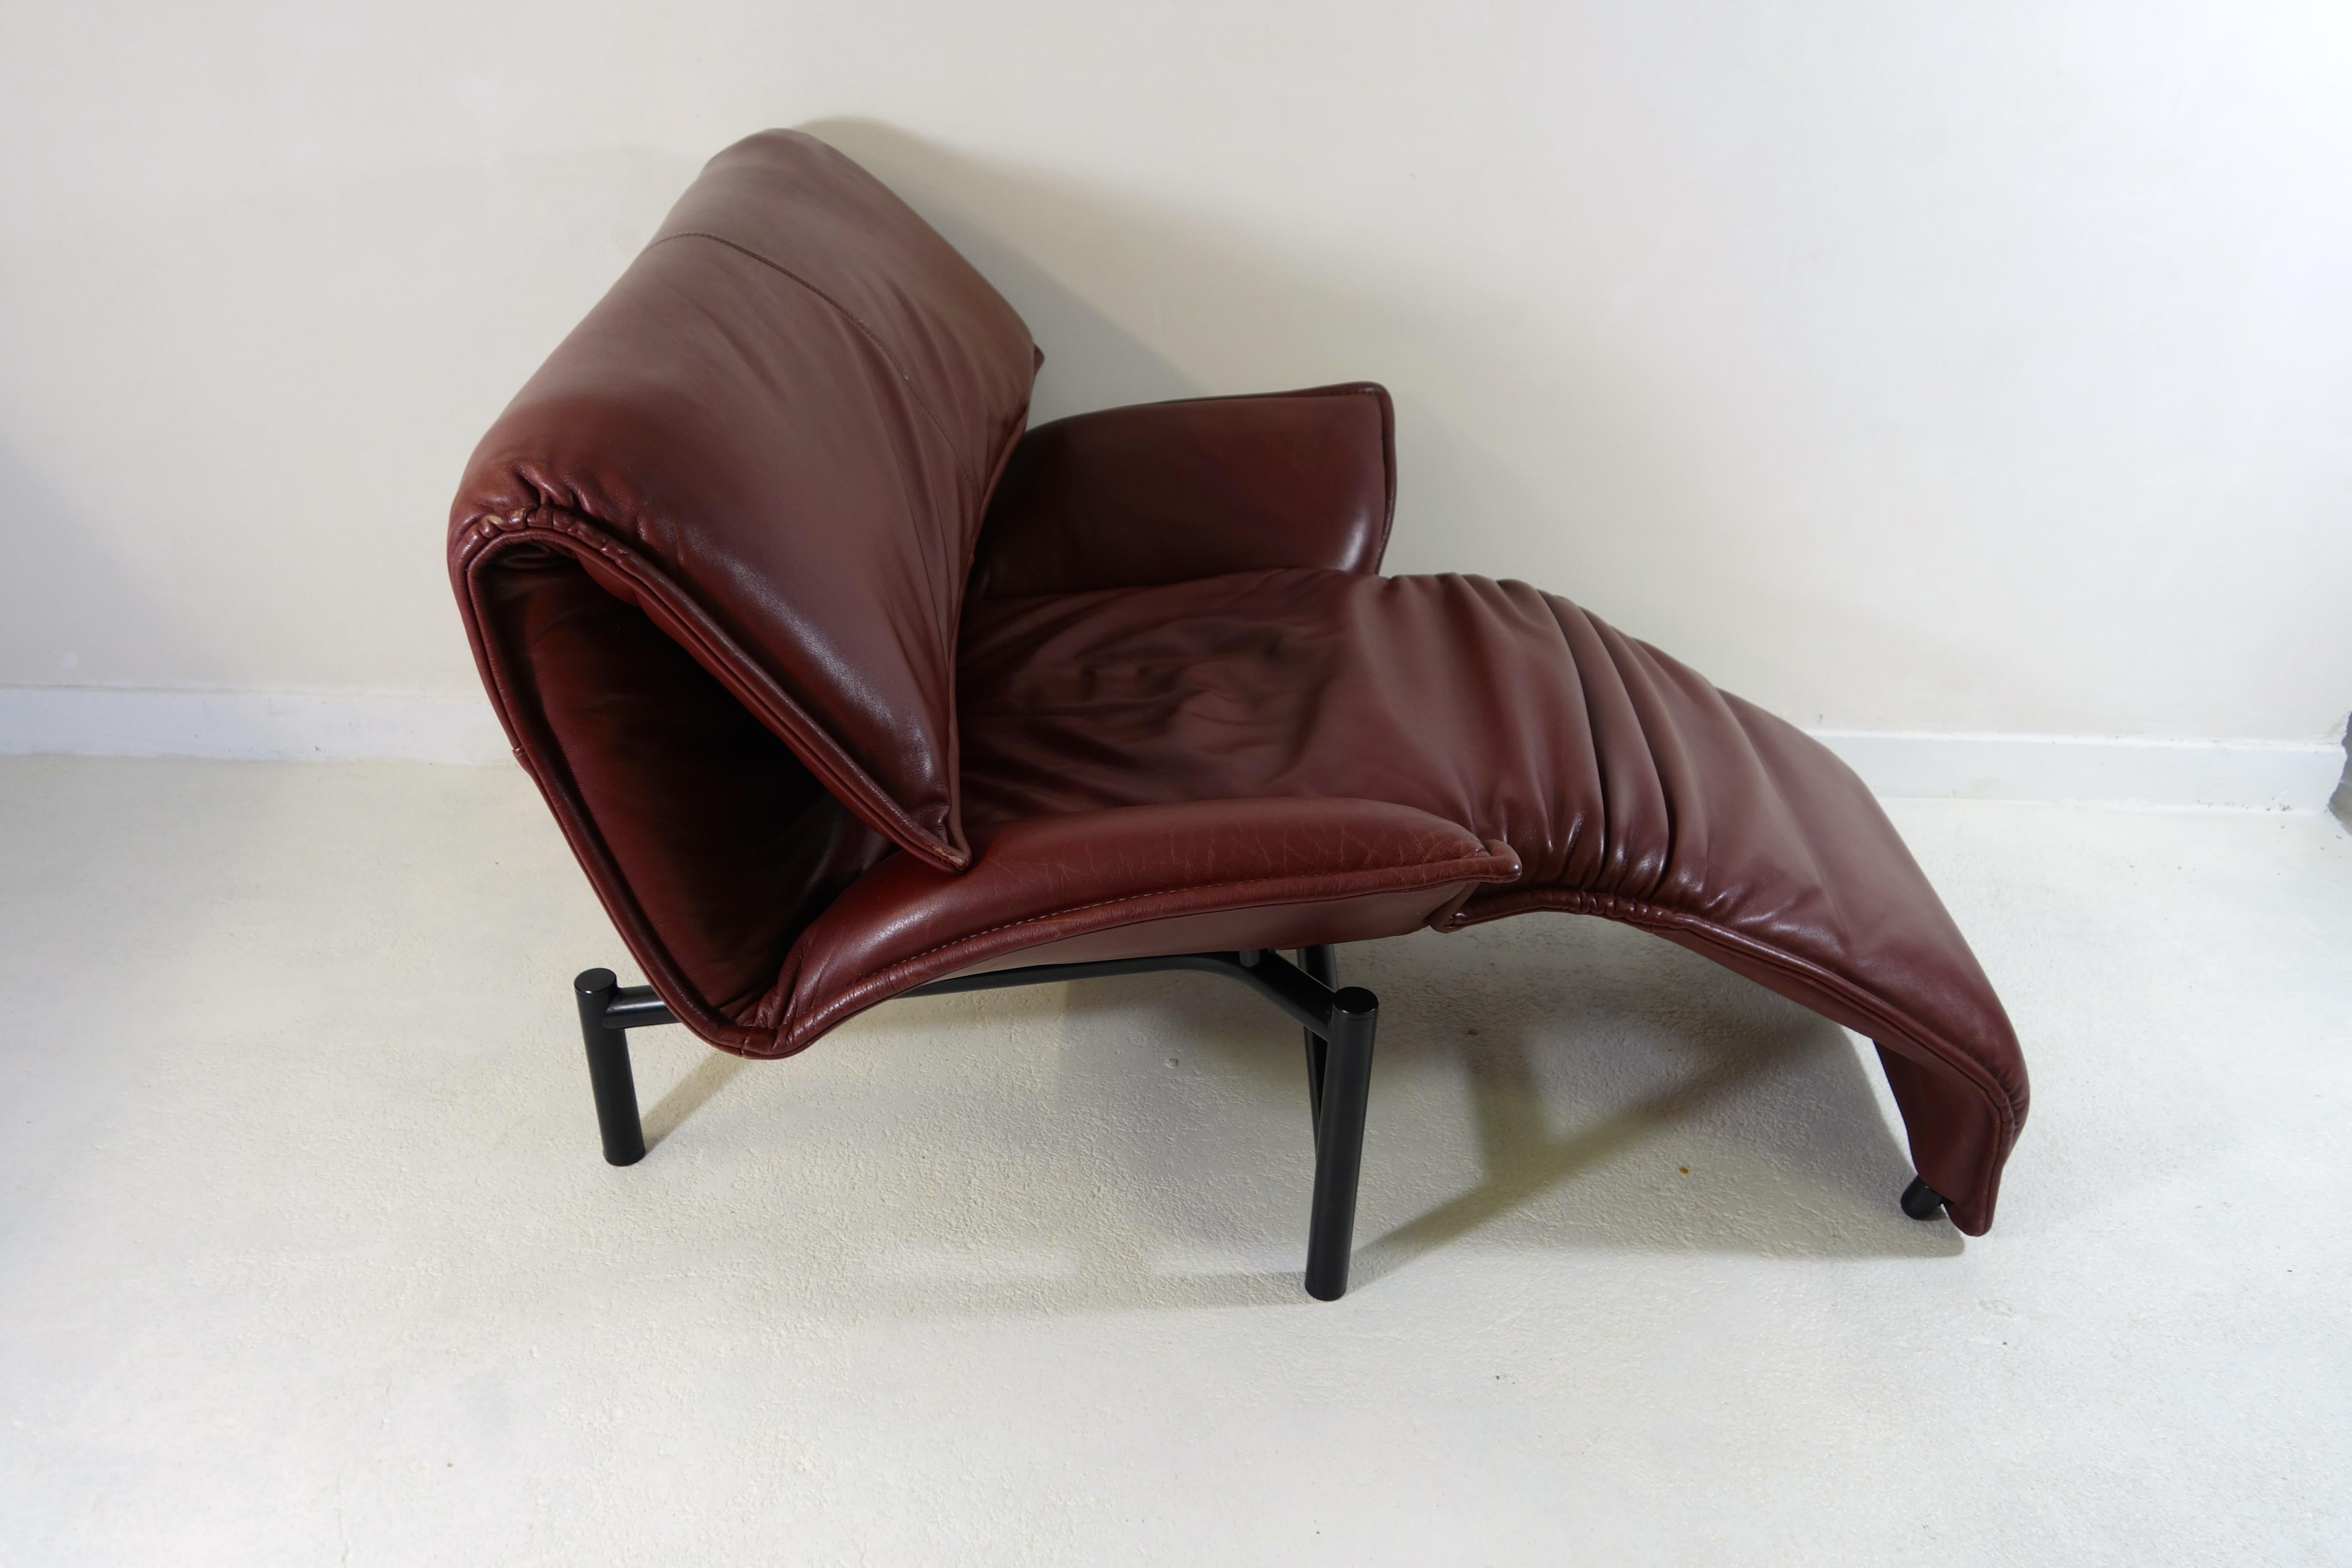 Italian Veranda Lounge Chair by Vico Magistretti for Cassina in Brown Leather Reclining